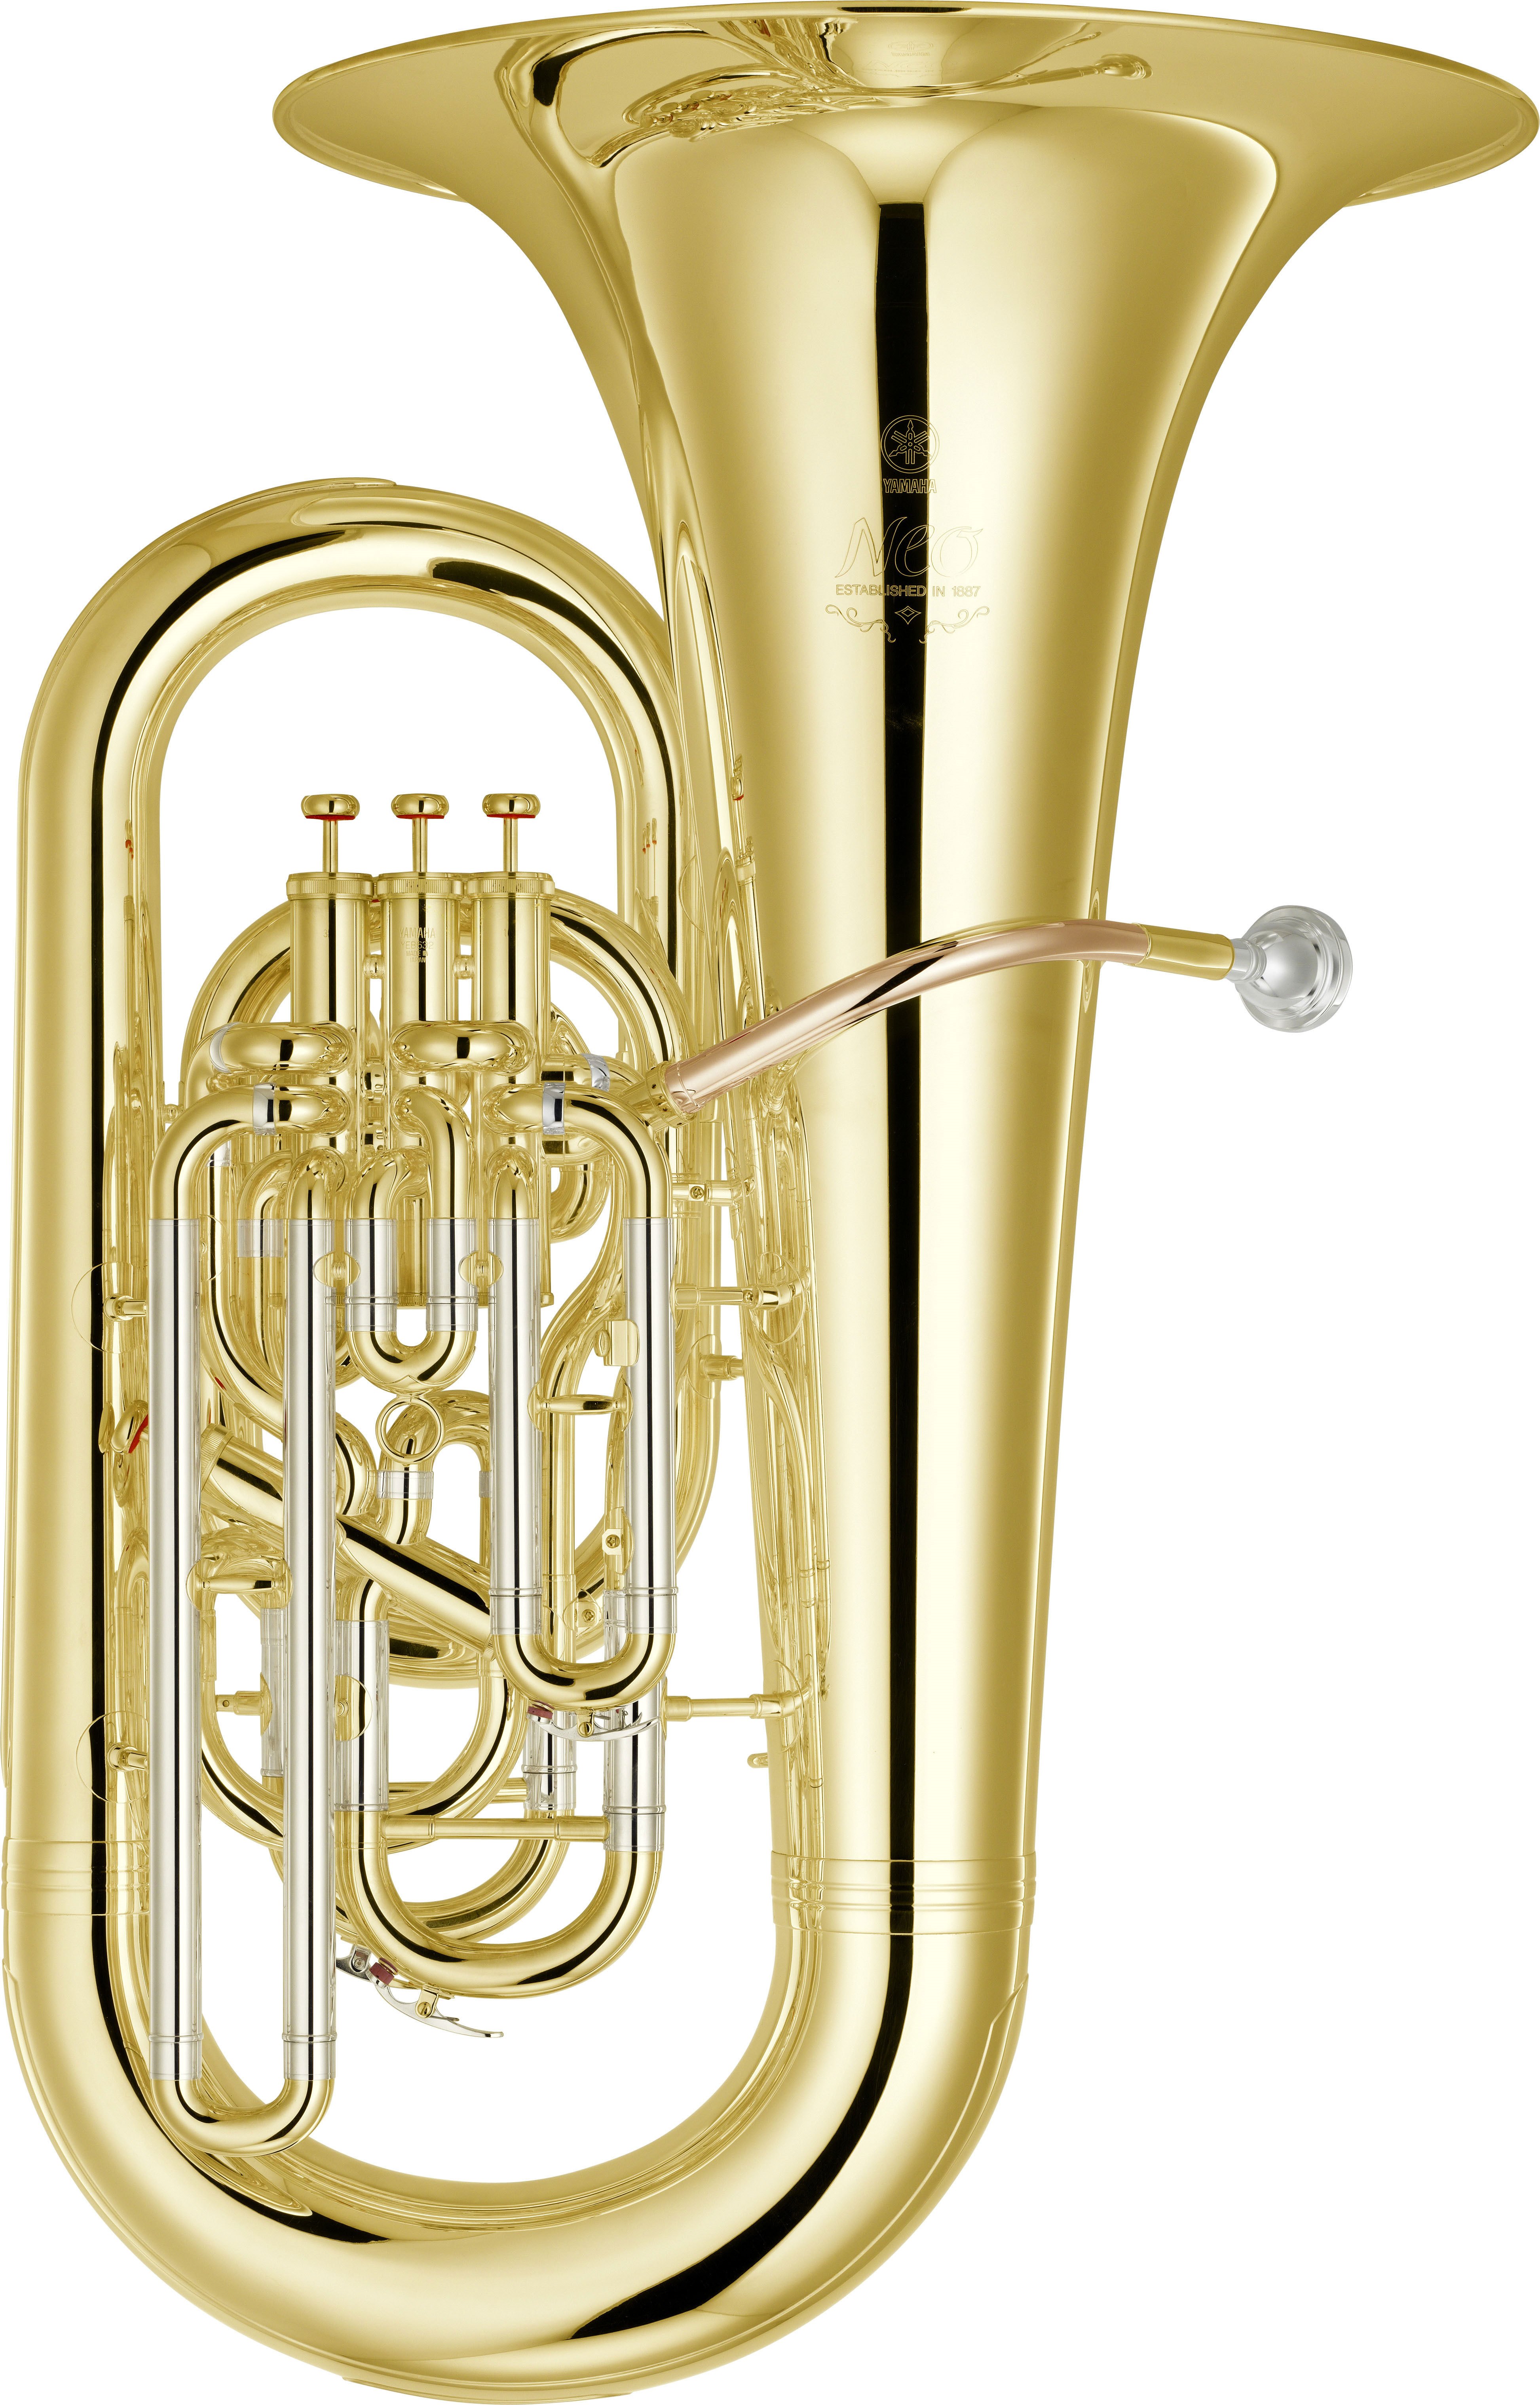 YEB-632S - Overview - Tubas - Brass & Woodwinds - Musical 